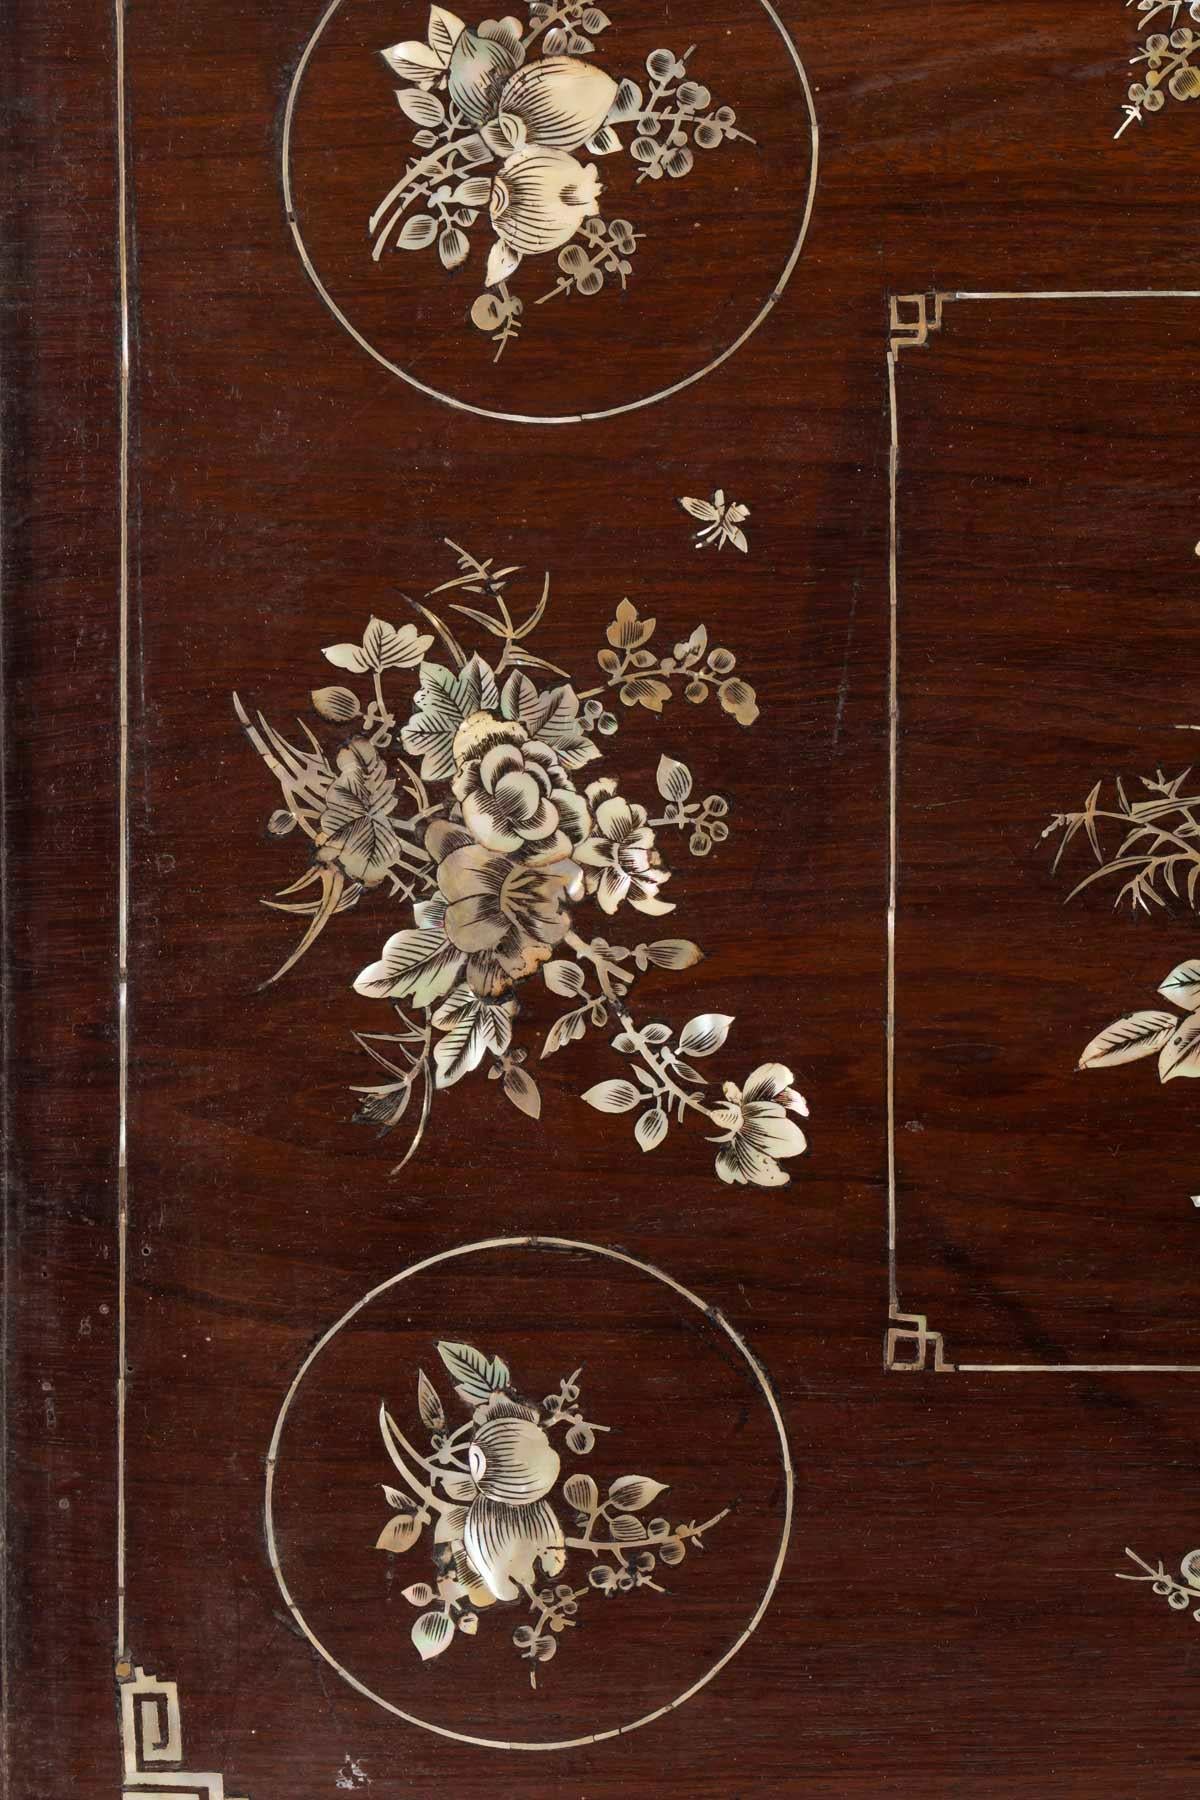 Chinese Export Exotic Dark Wood Rectangular Tray Inlaid with Mother of Pearl Floral Designs